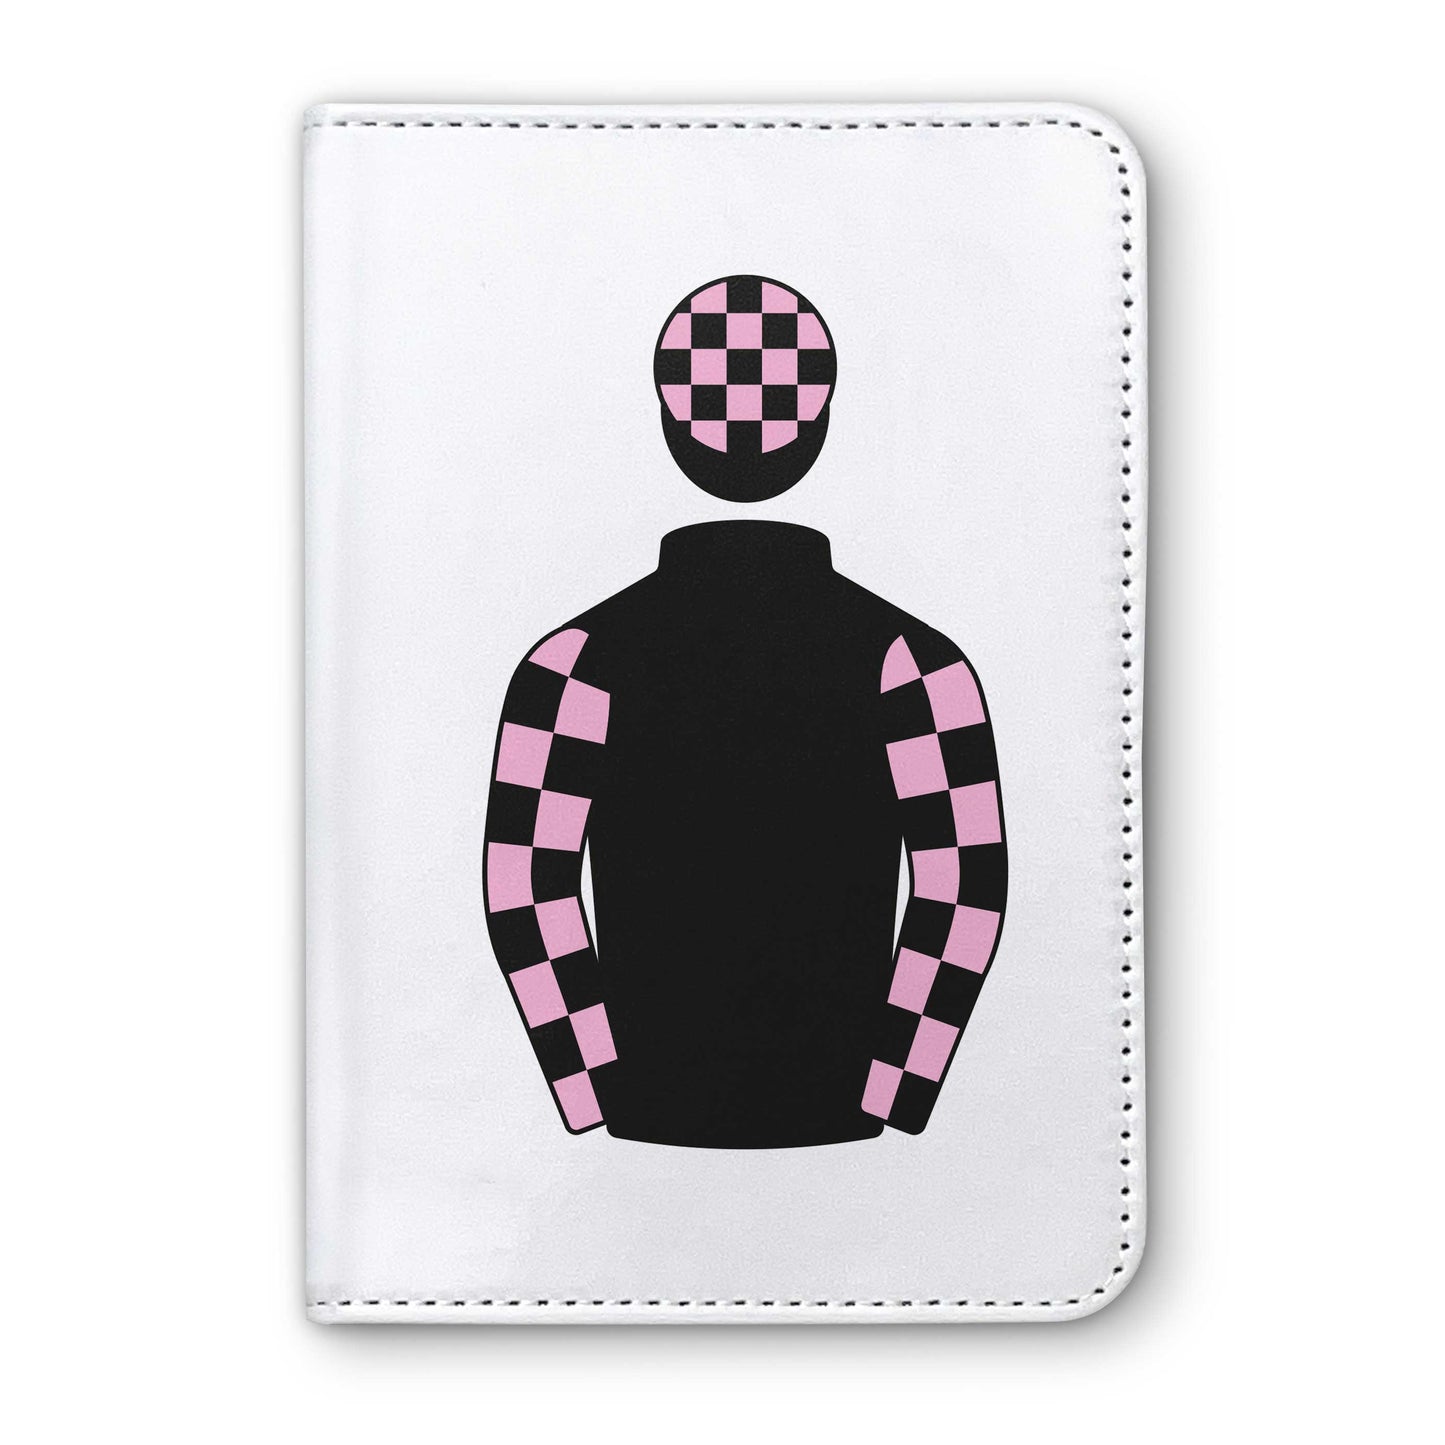 The Can't Say No Partnership Horse Racing Passport Holder - Hacked Up Horse Racing Gifts